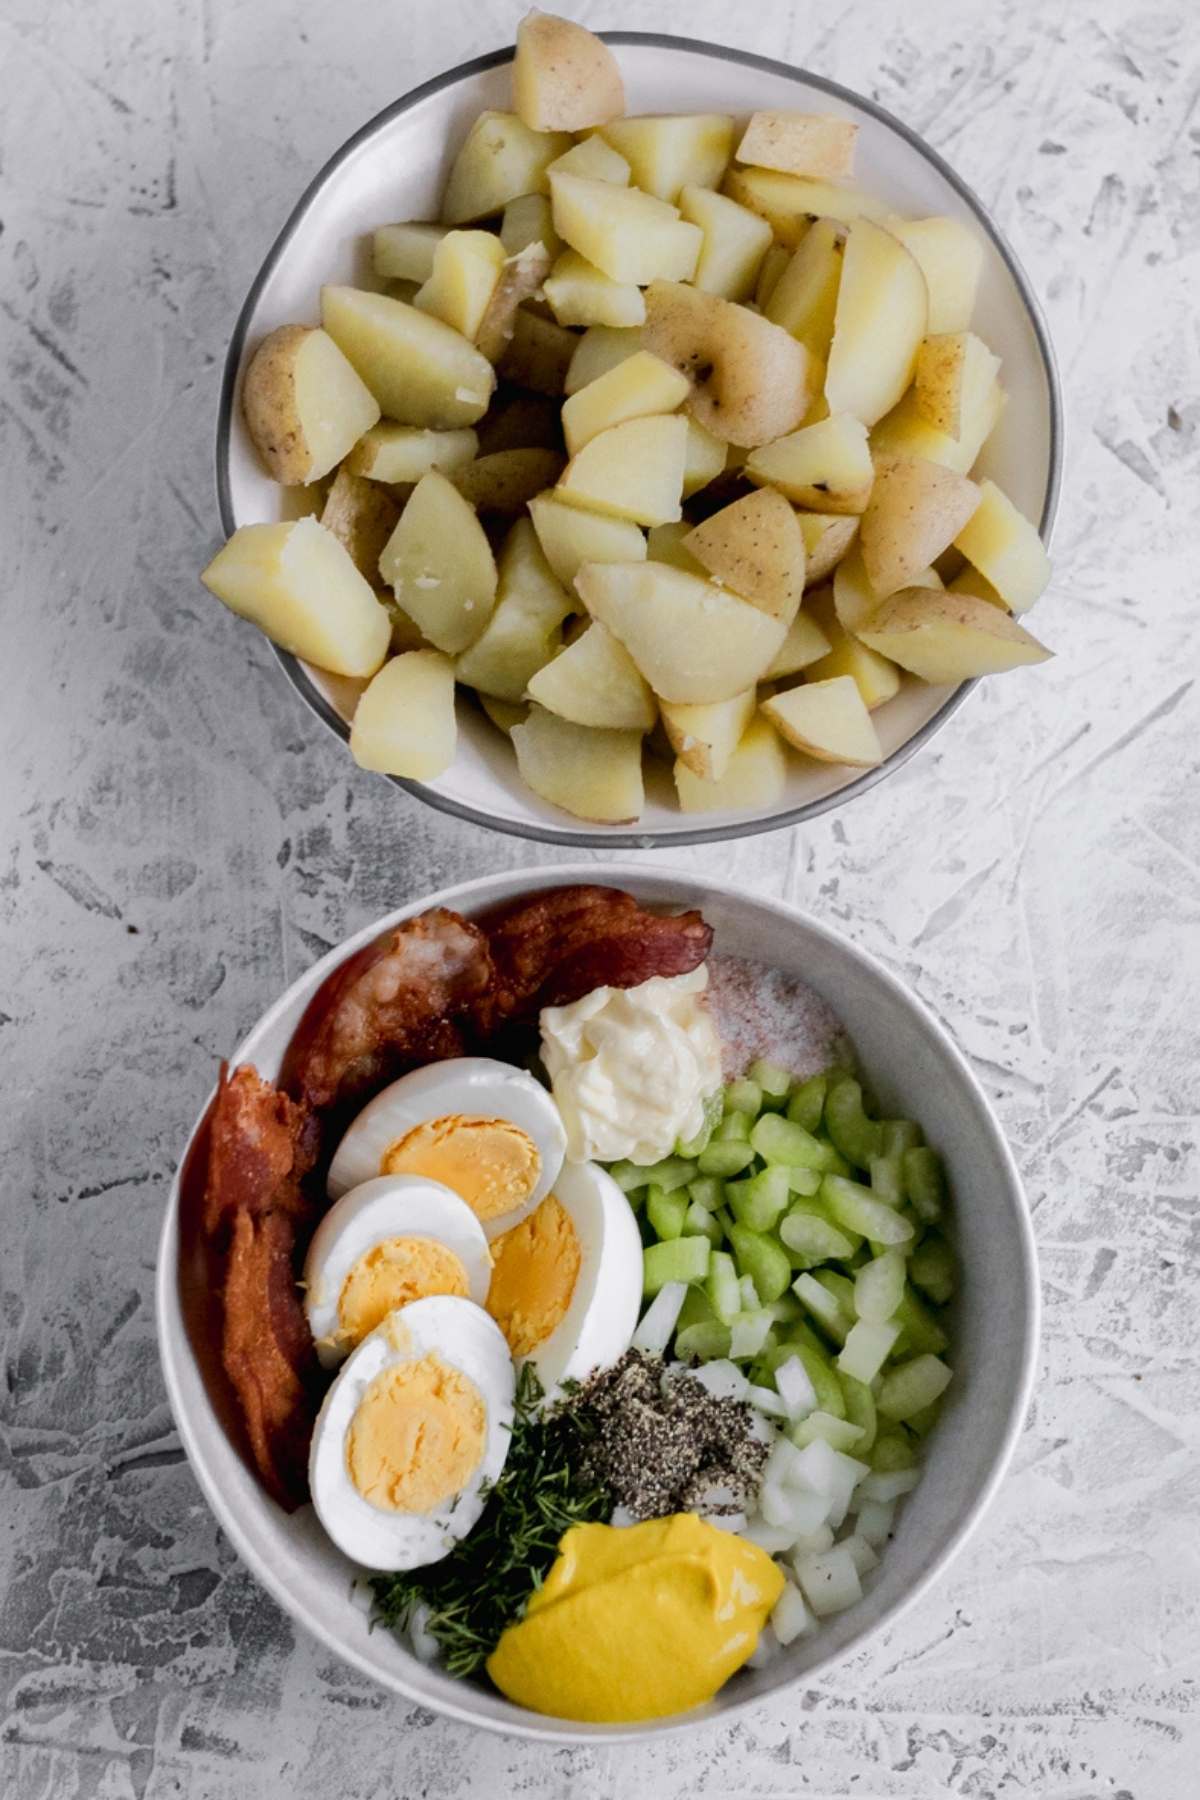 A bowl of cooked potatoes and a bowl filled with cooked bacon, hard boiled eggs, mayo, seasonings, diced celery and diced onion.